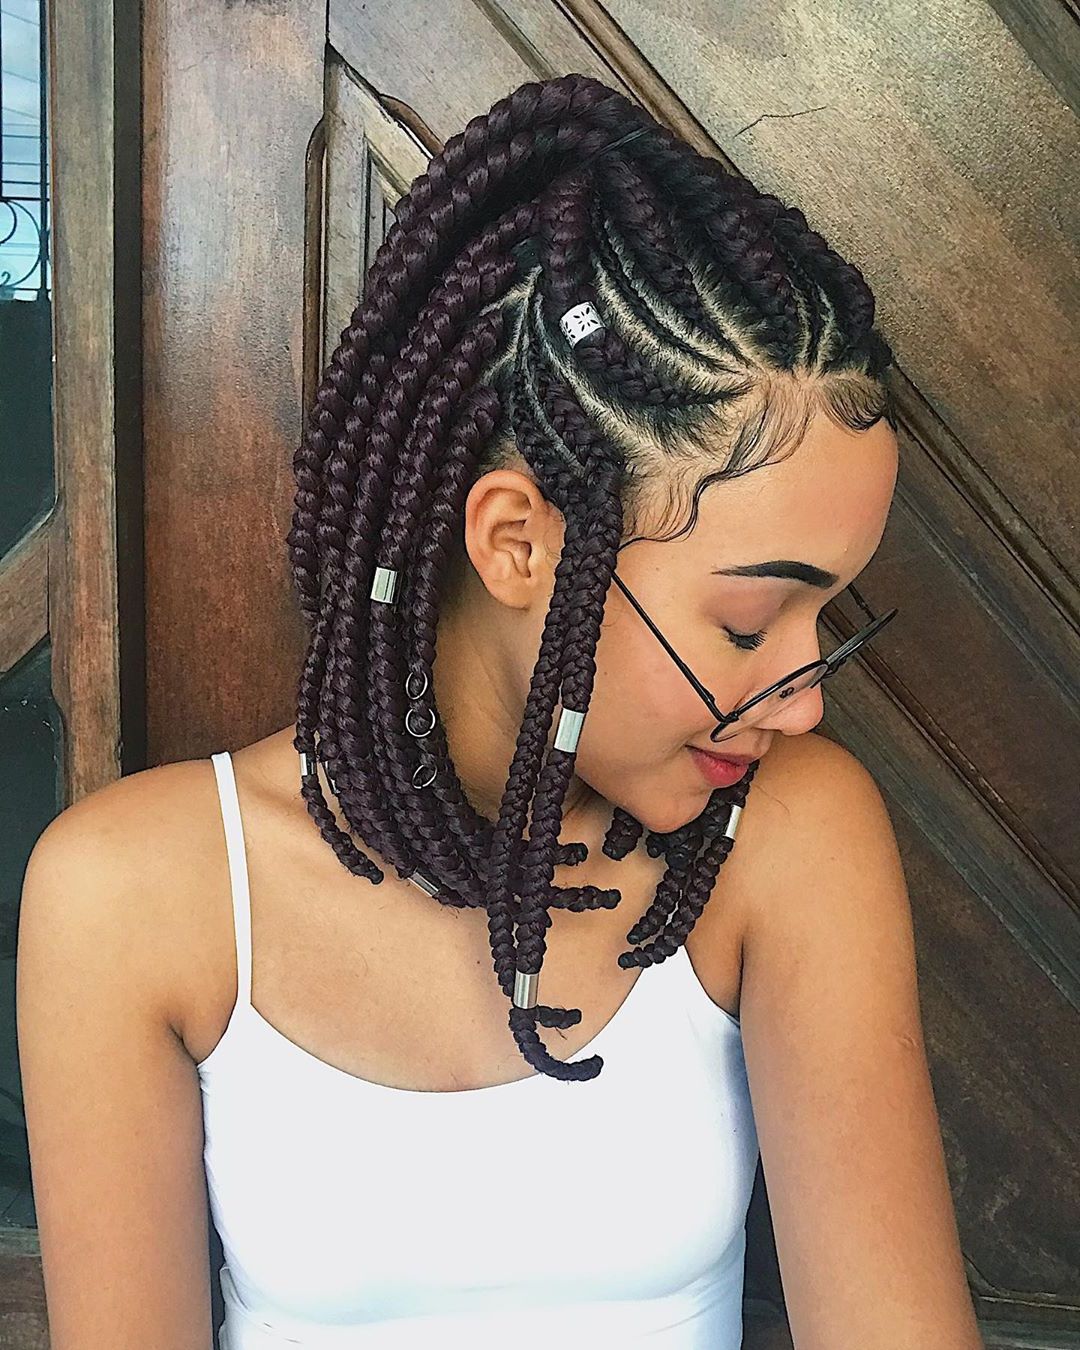 21 Bob Braid Hairstyles You'll Obsess Over For 2020 | Glamour In Braided Bob Short Hairstyles (View 1 of 25)